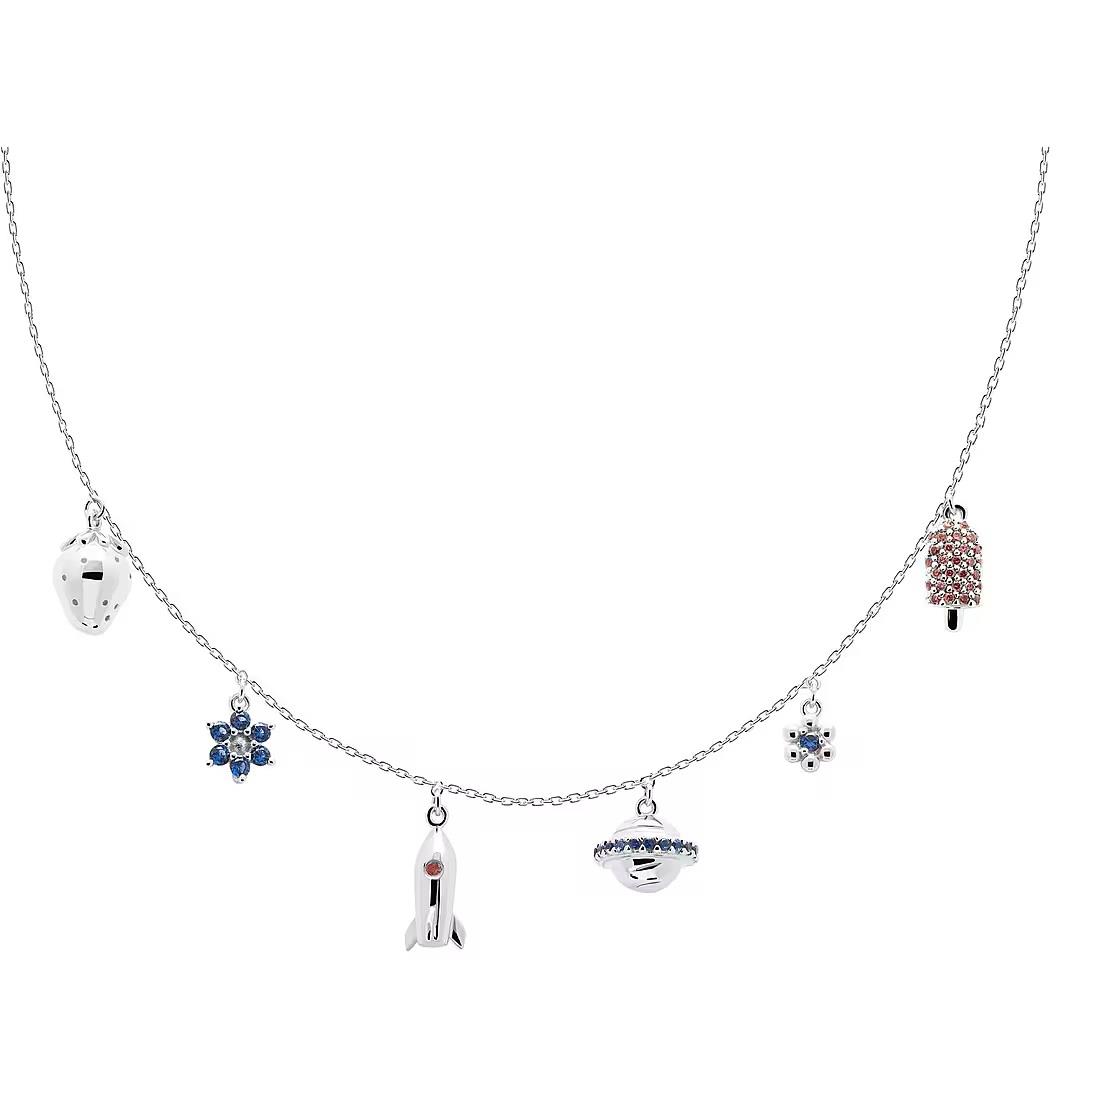 Collana in argento con charm - PDPAOLA